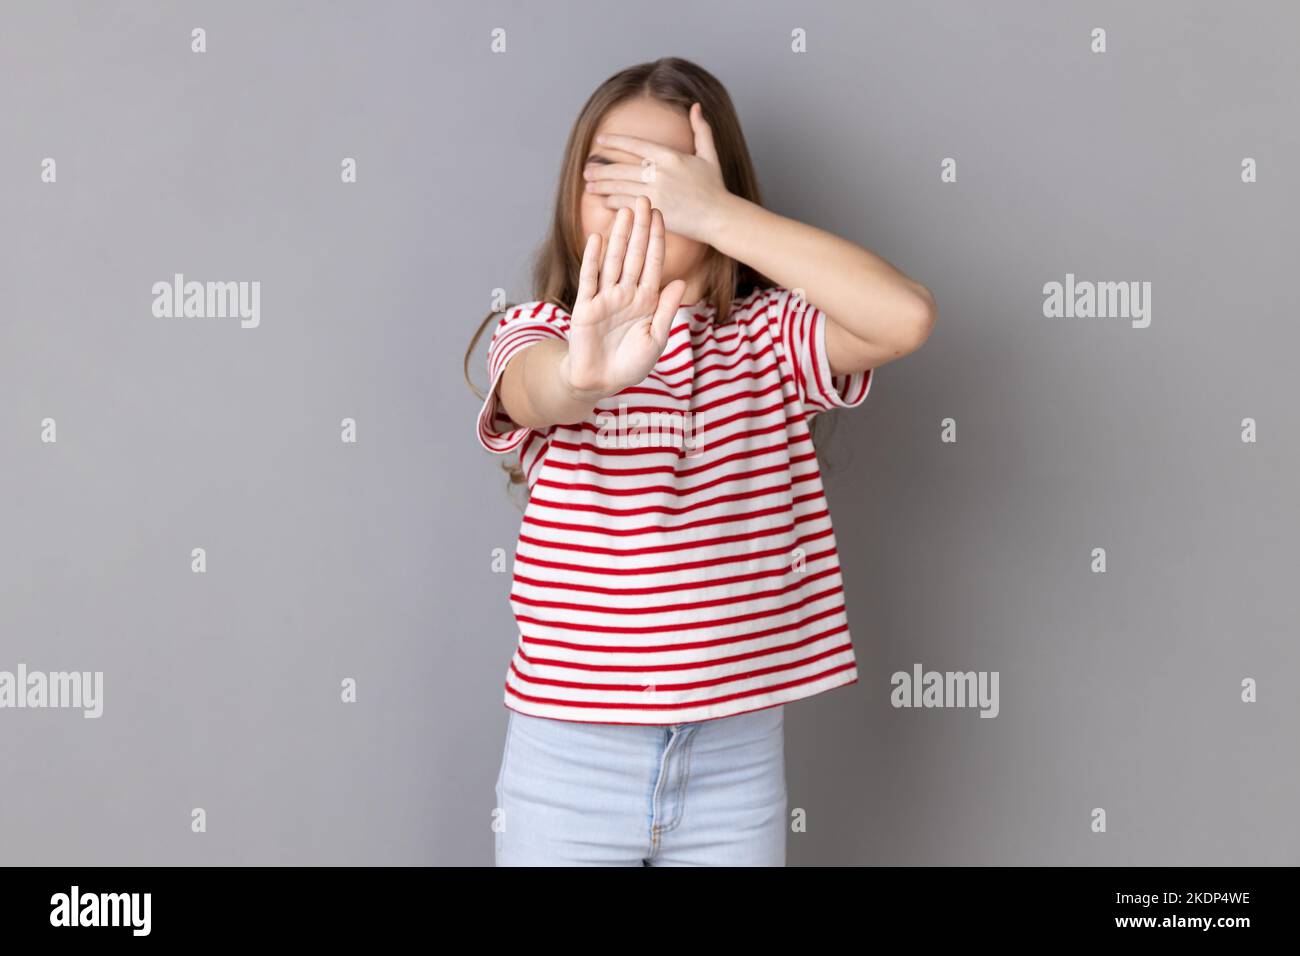 Portrait of sacred little girl wearing striped T-shirt closing eyes with palm of hand, stretching out another hand forward, showing stop gesture. Indoor studio shot isolated on gray background. Stock Photo